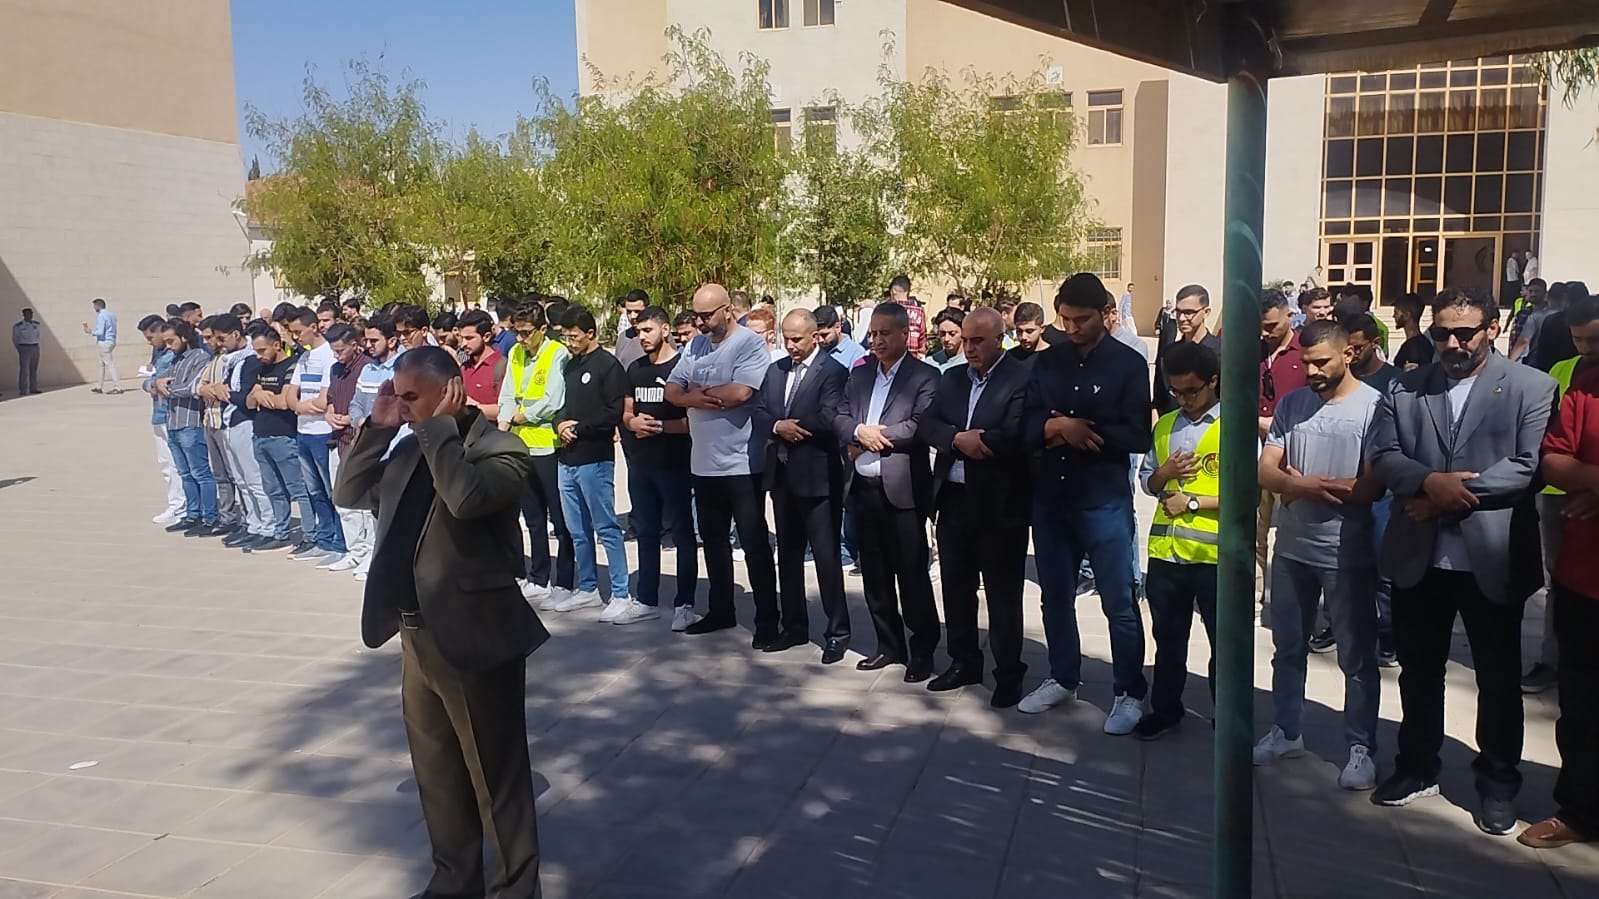 A solidarity stand in support of Al-Aqsa at Al-Hussein Talal University